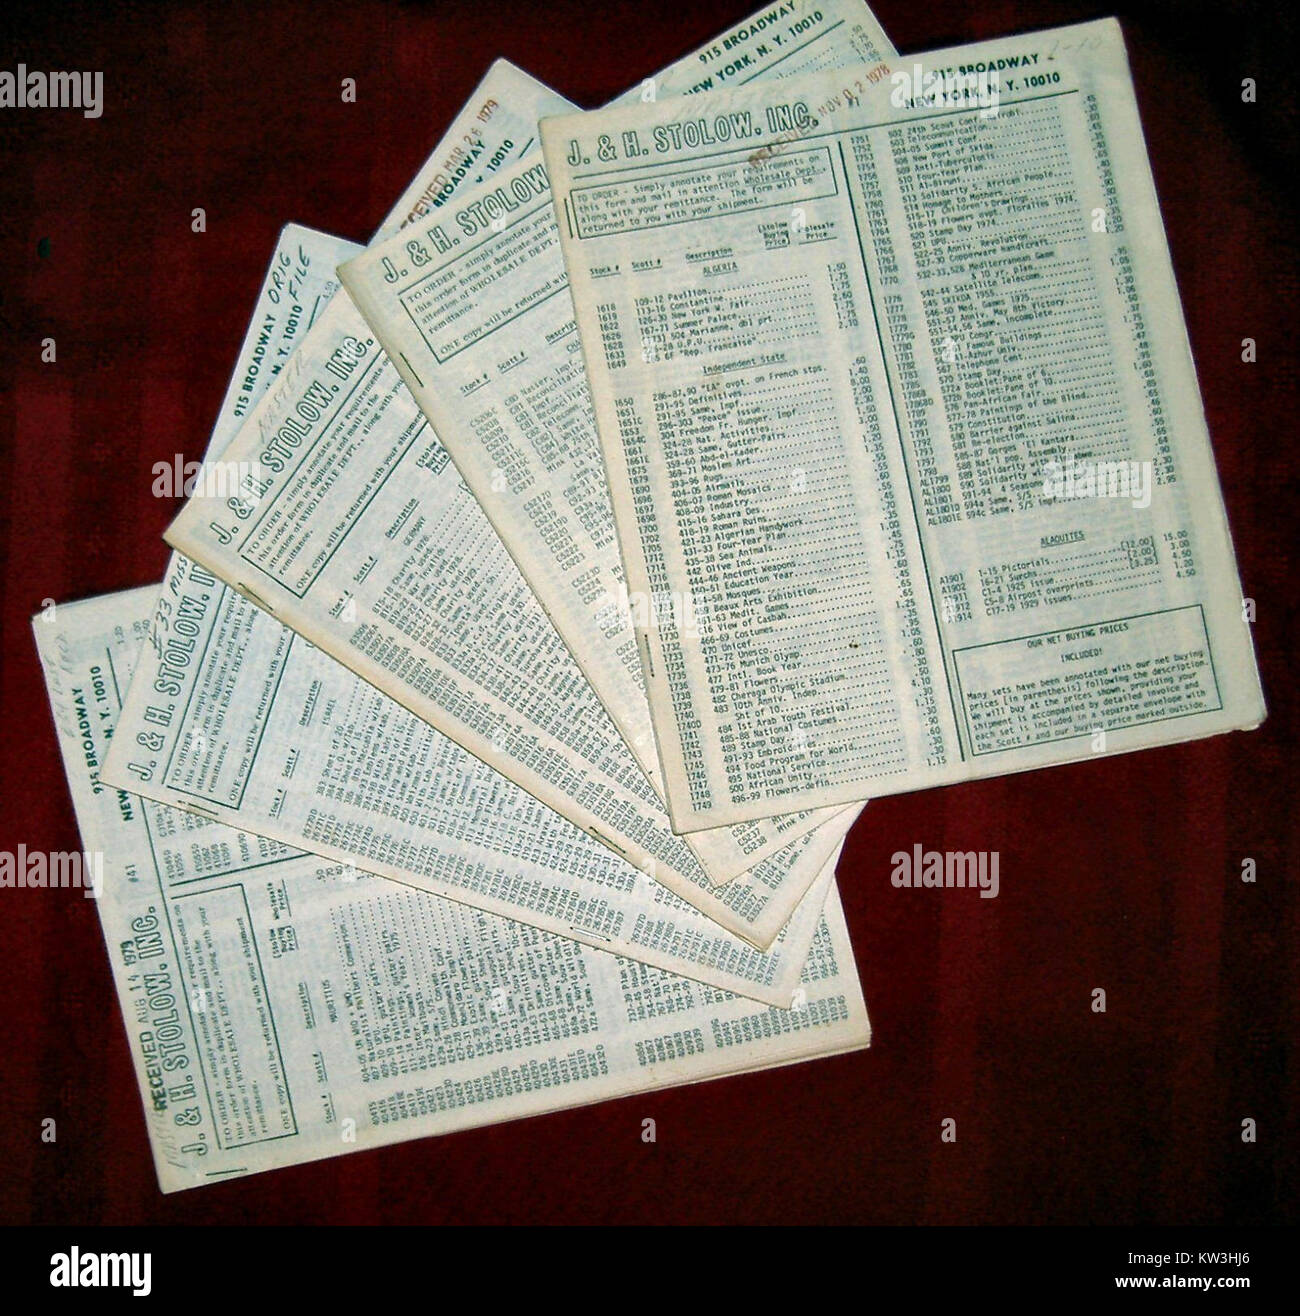 J H Stolow Stamp Dealer Price Lists 1978 And 1979 Stock Photo Alamy